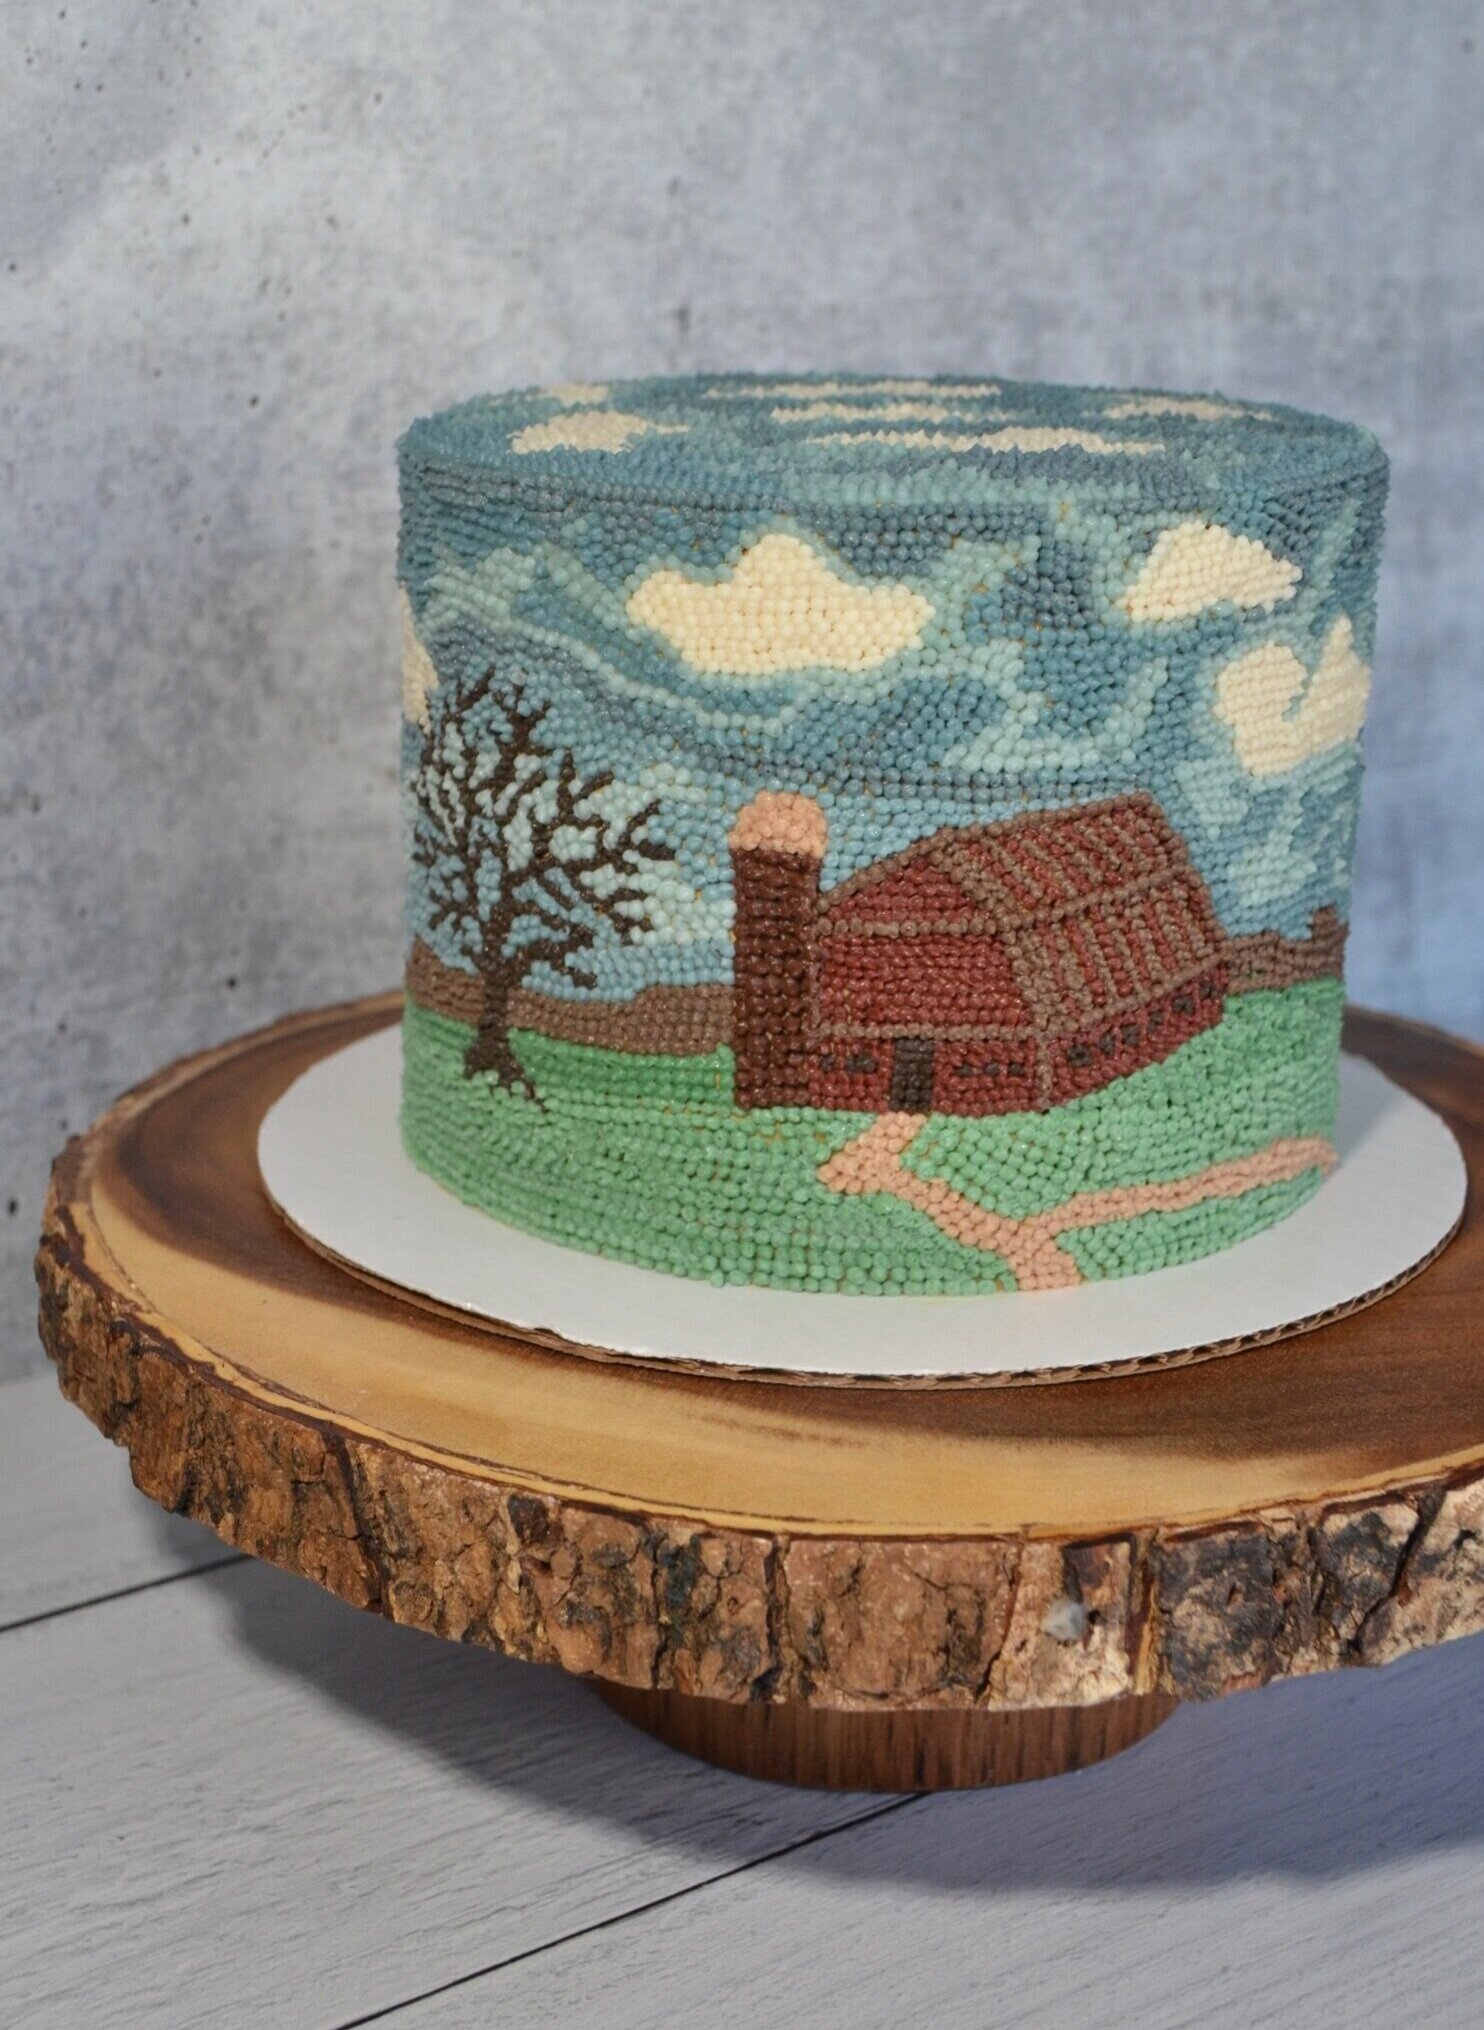 Barn cake decorated with buttercream dots